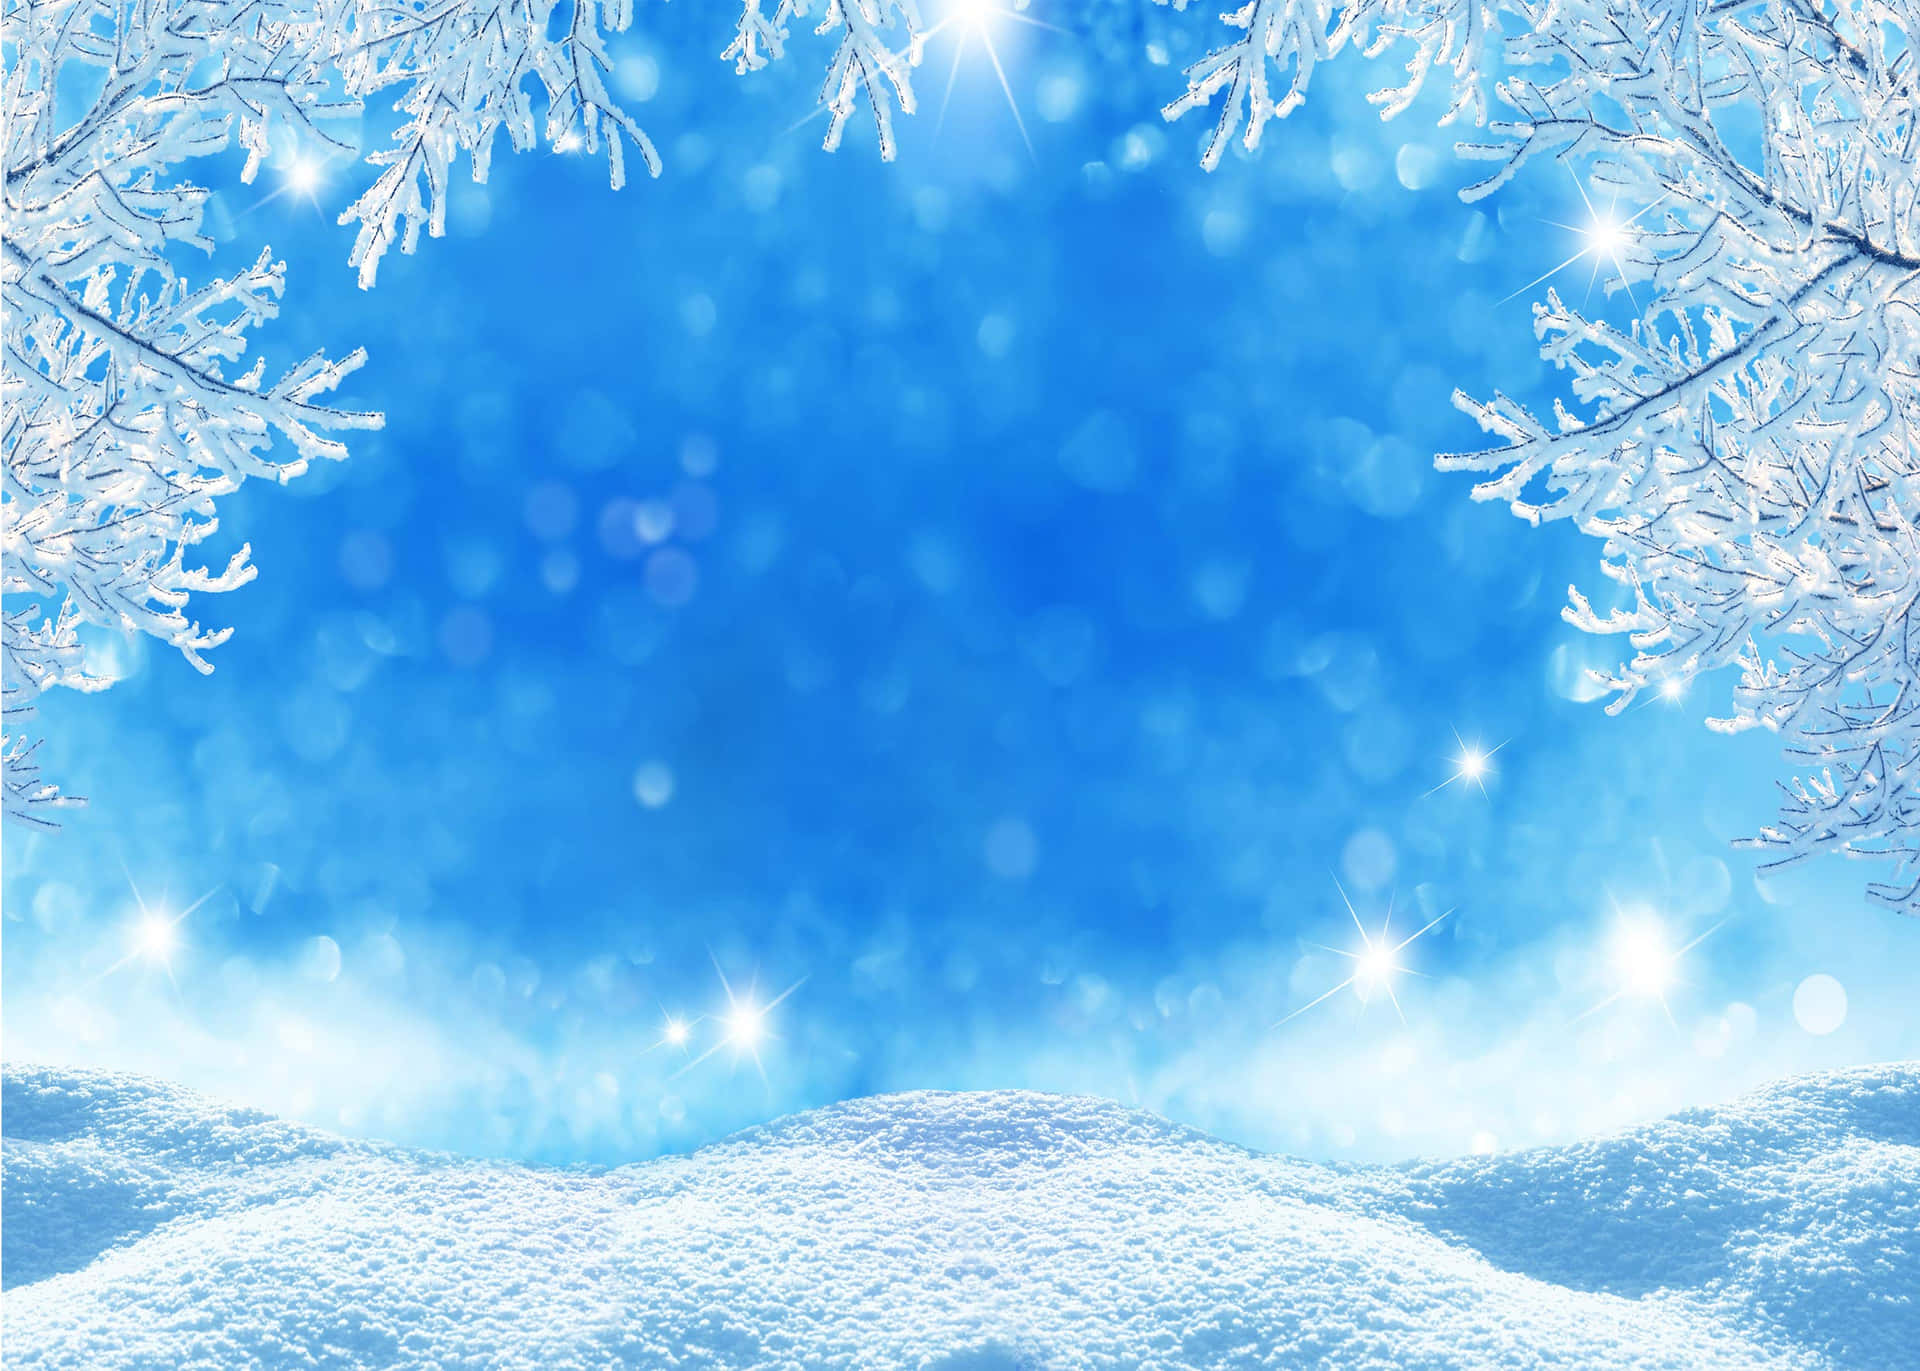 Feel the chill with this icy background